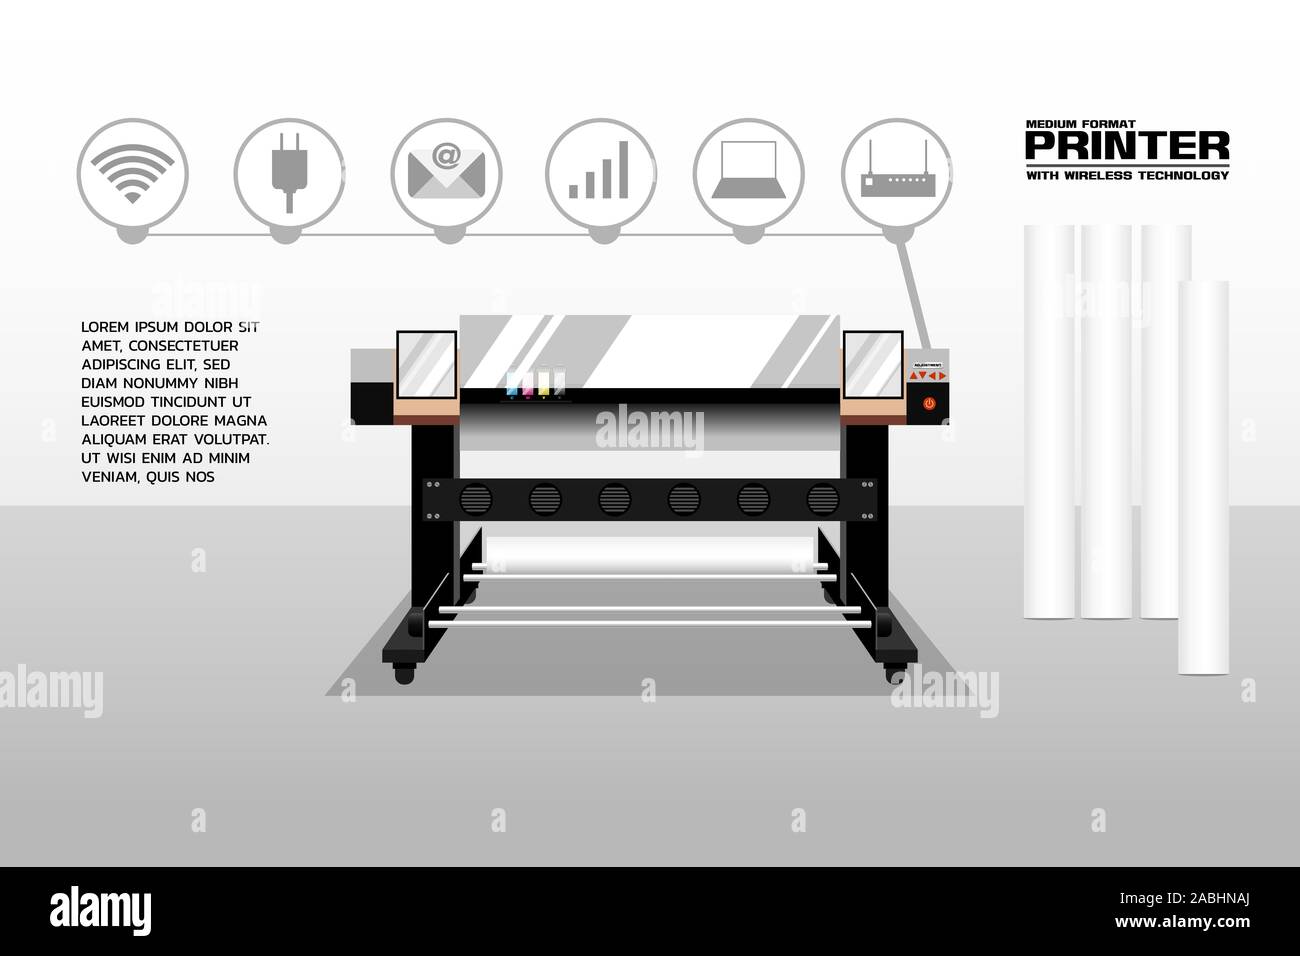 Medium format printer plotter, inkjet printing system with wireless function. Vary print heads and formats for print many products such as banner, sig Stock Vector